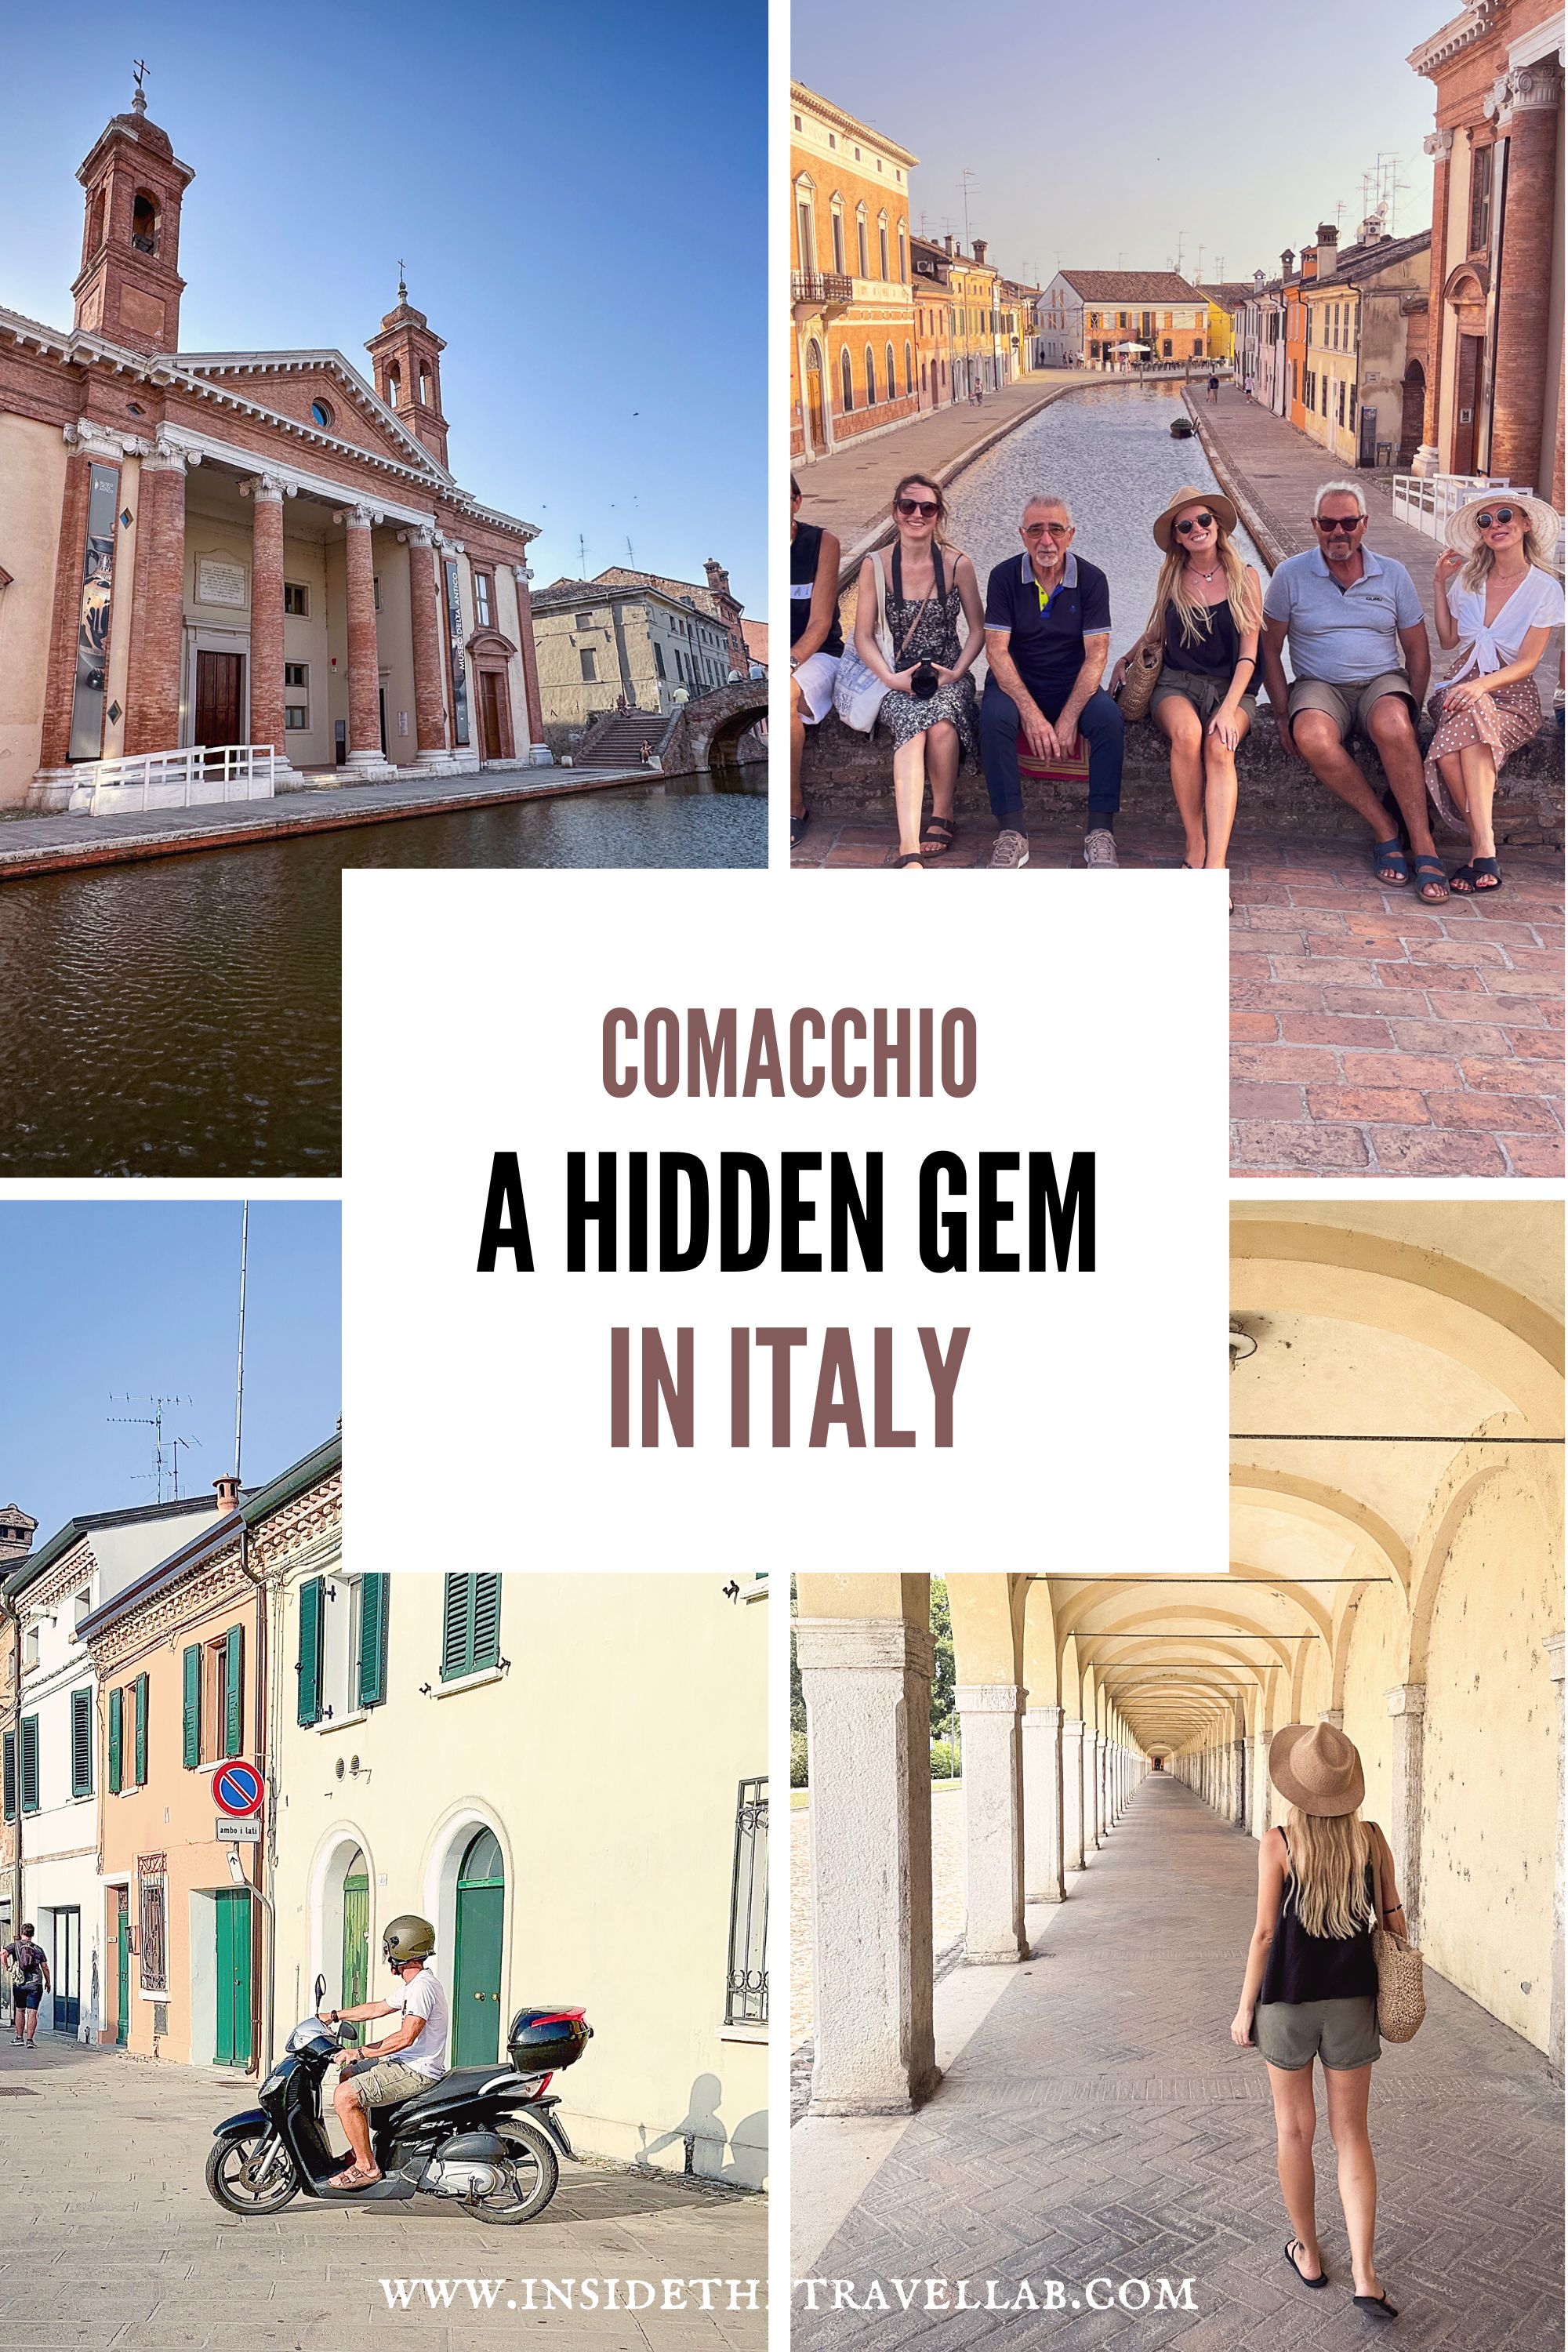 Cover image montage of different things to do in Comacchio Italy